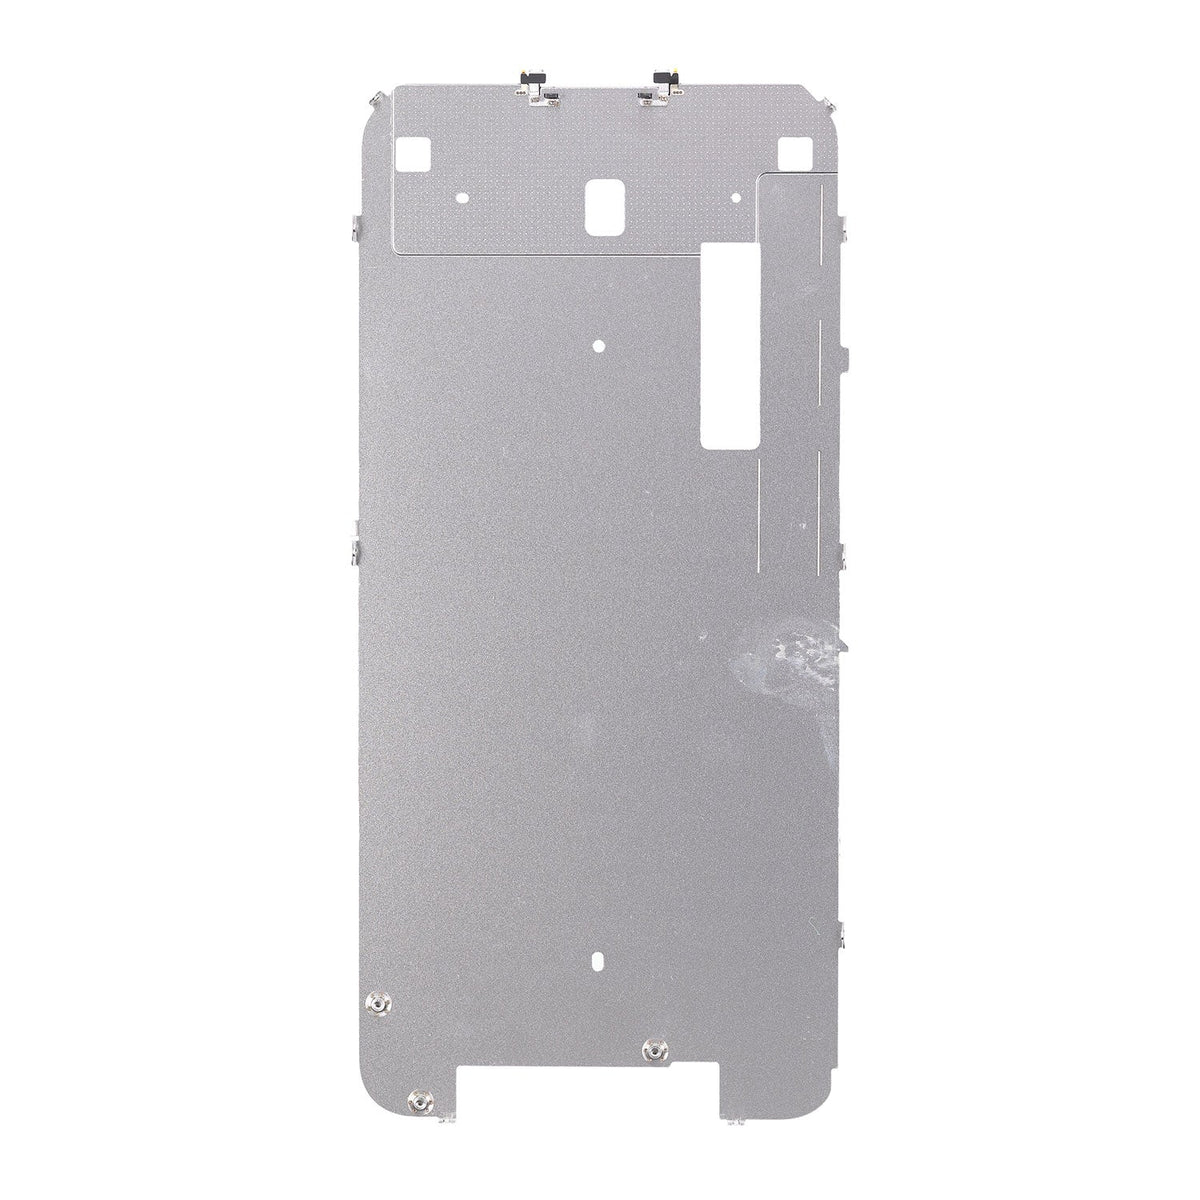 LCD SHIELD PLATE FOR IPHONE 11